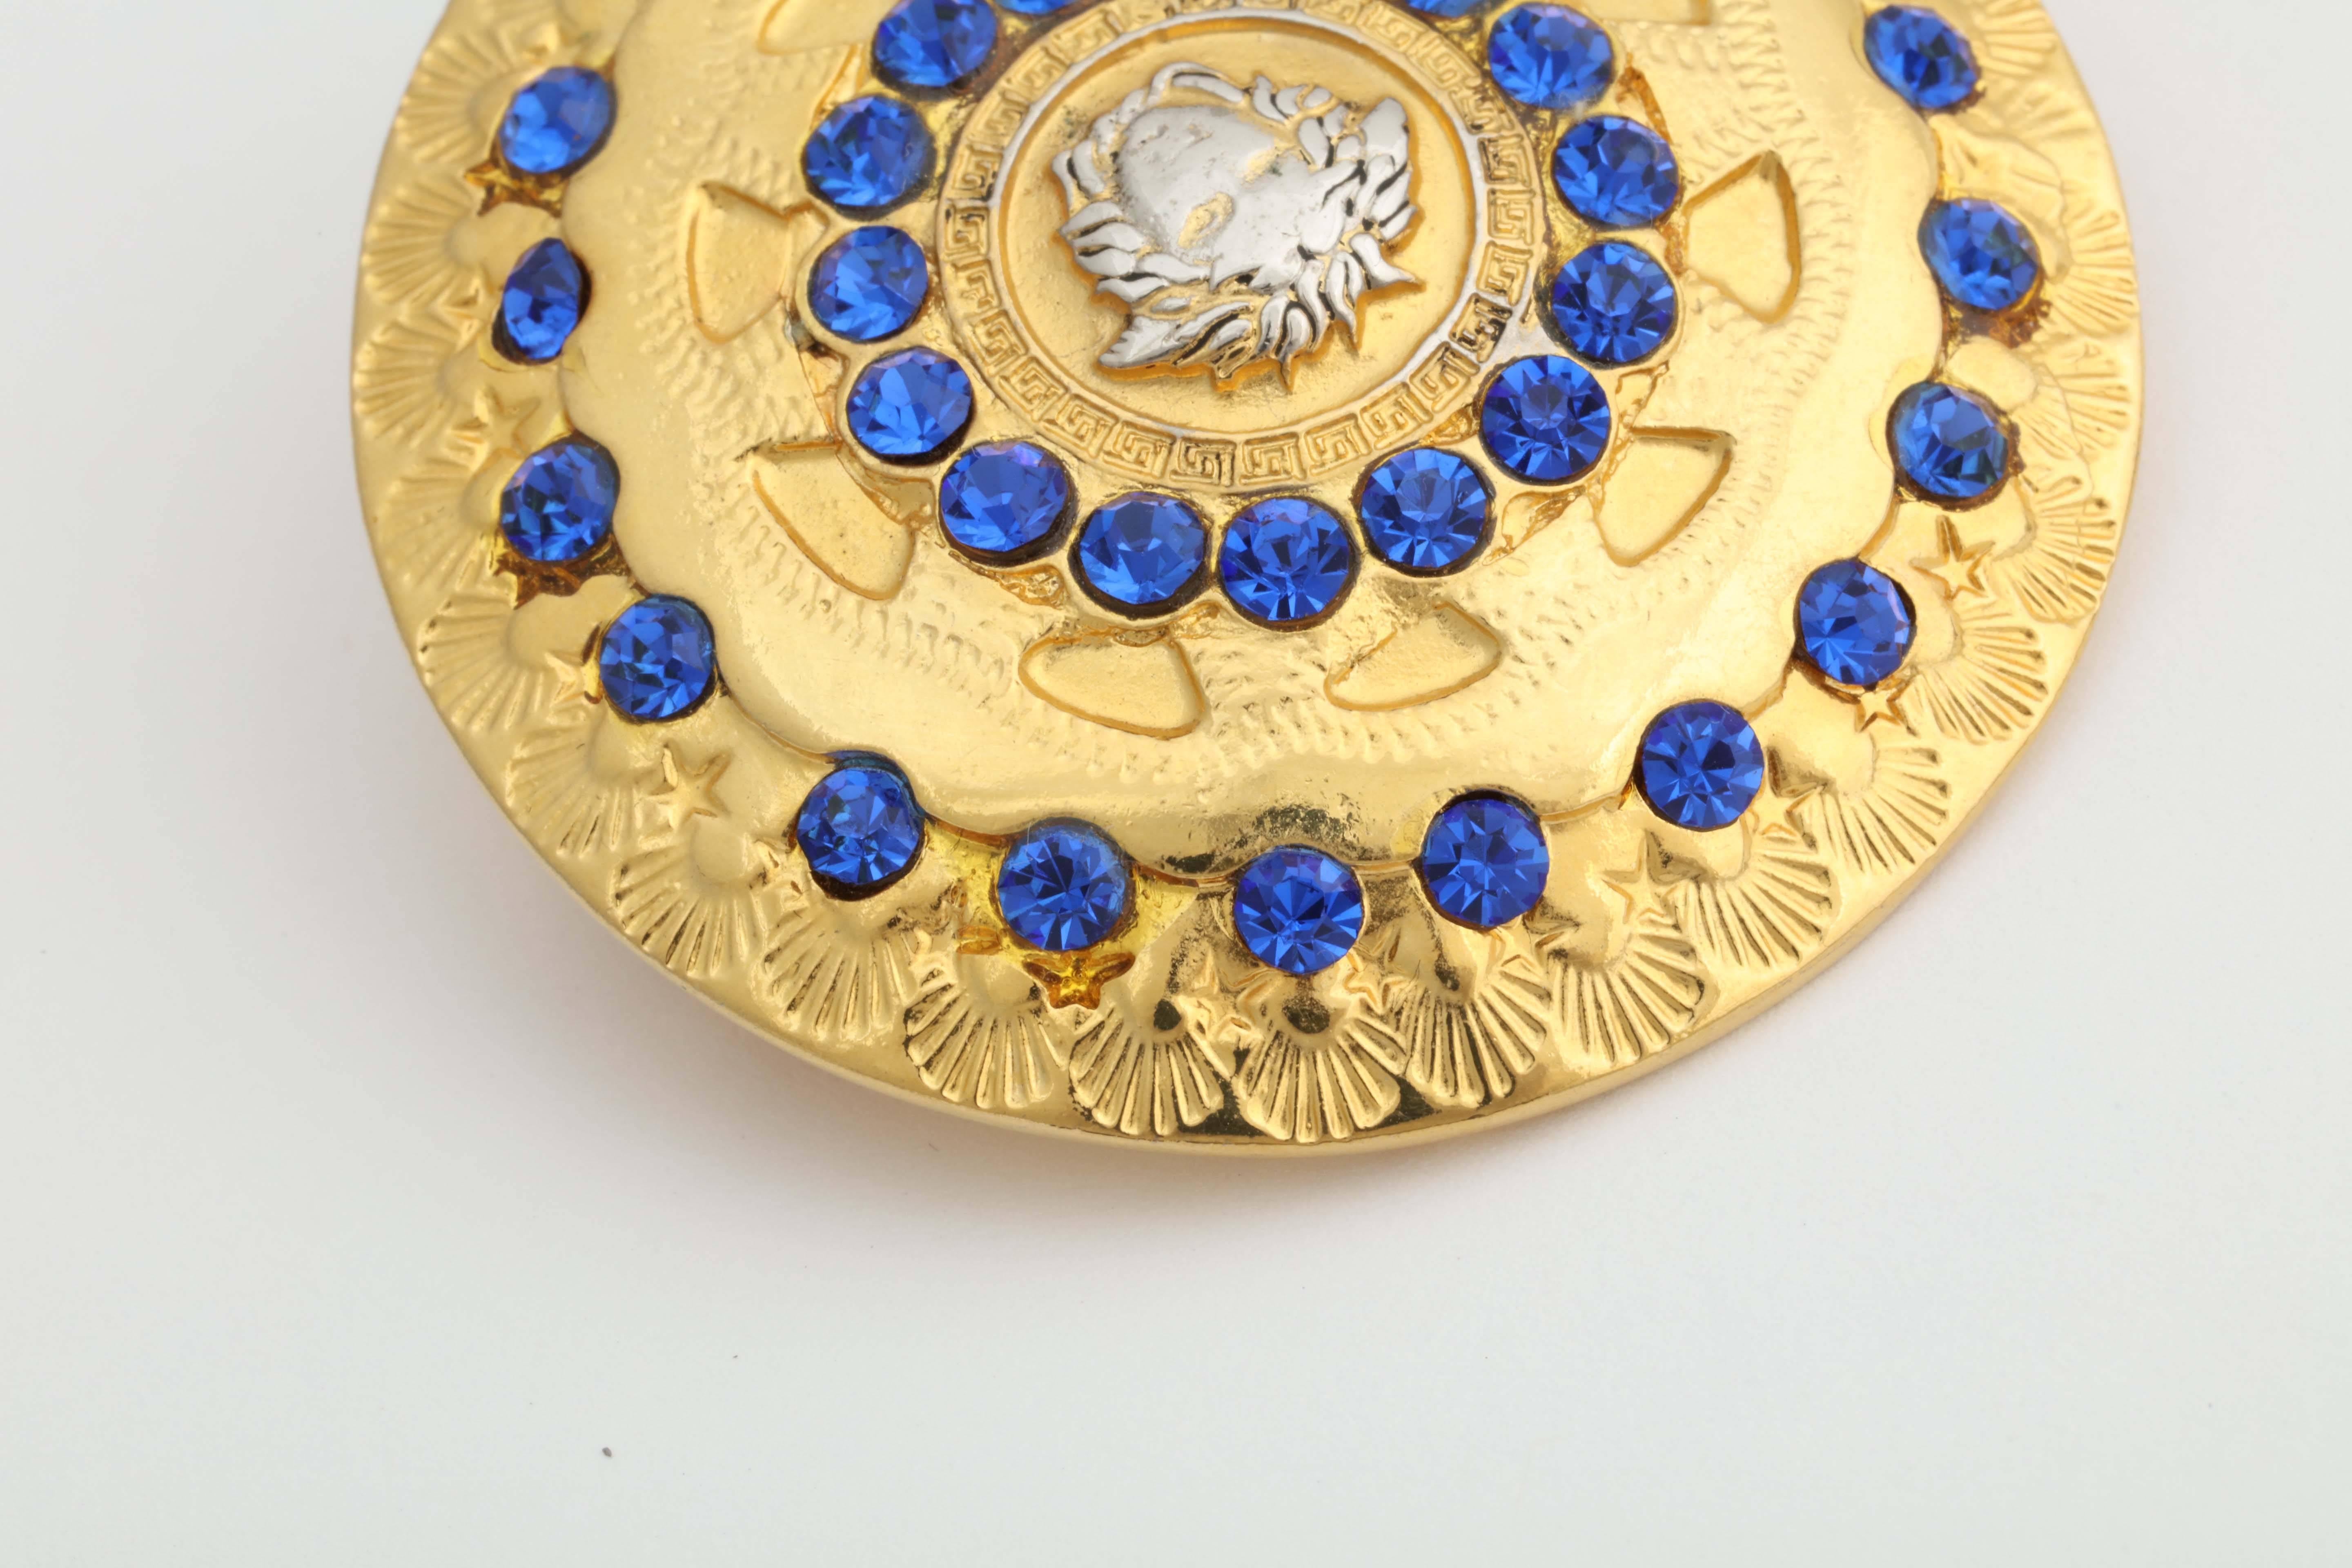 Gianni Versace Medusa Hair Pin with Blue Rhinestones In Excellent Condition For Sale In Chicago, IL